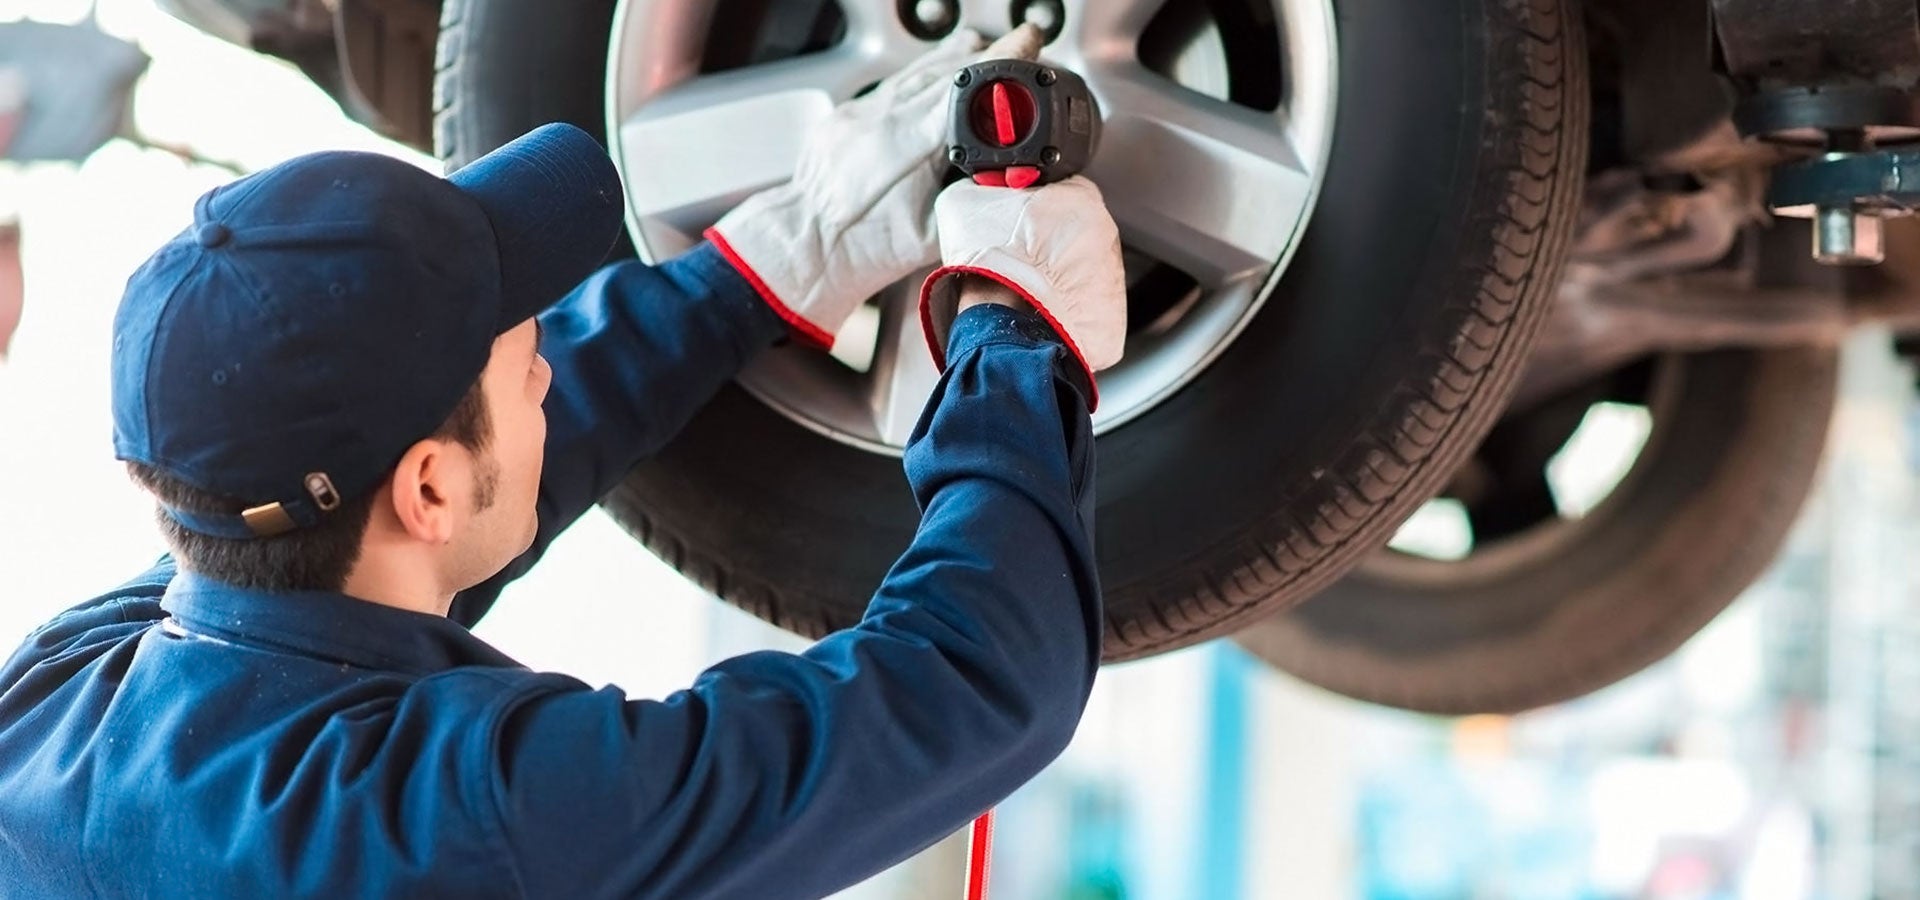 Get the Best Repair From the Best Technicians